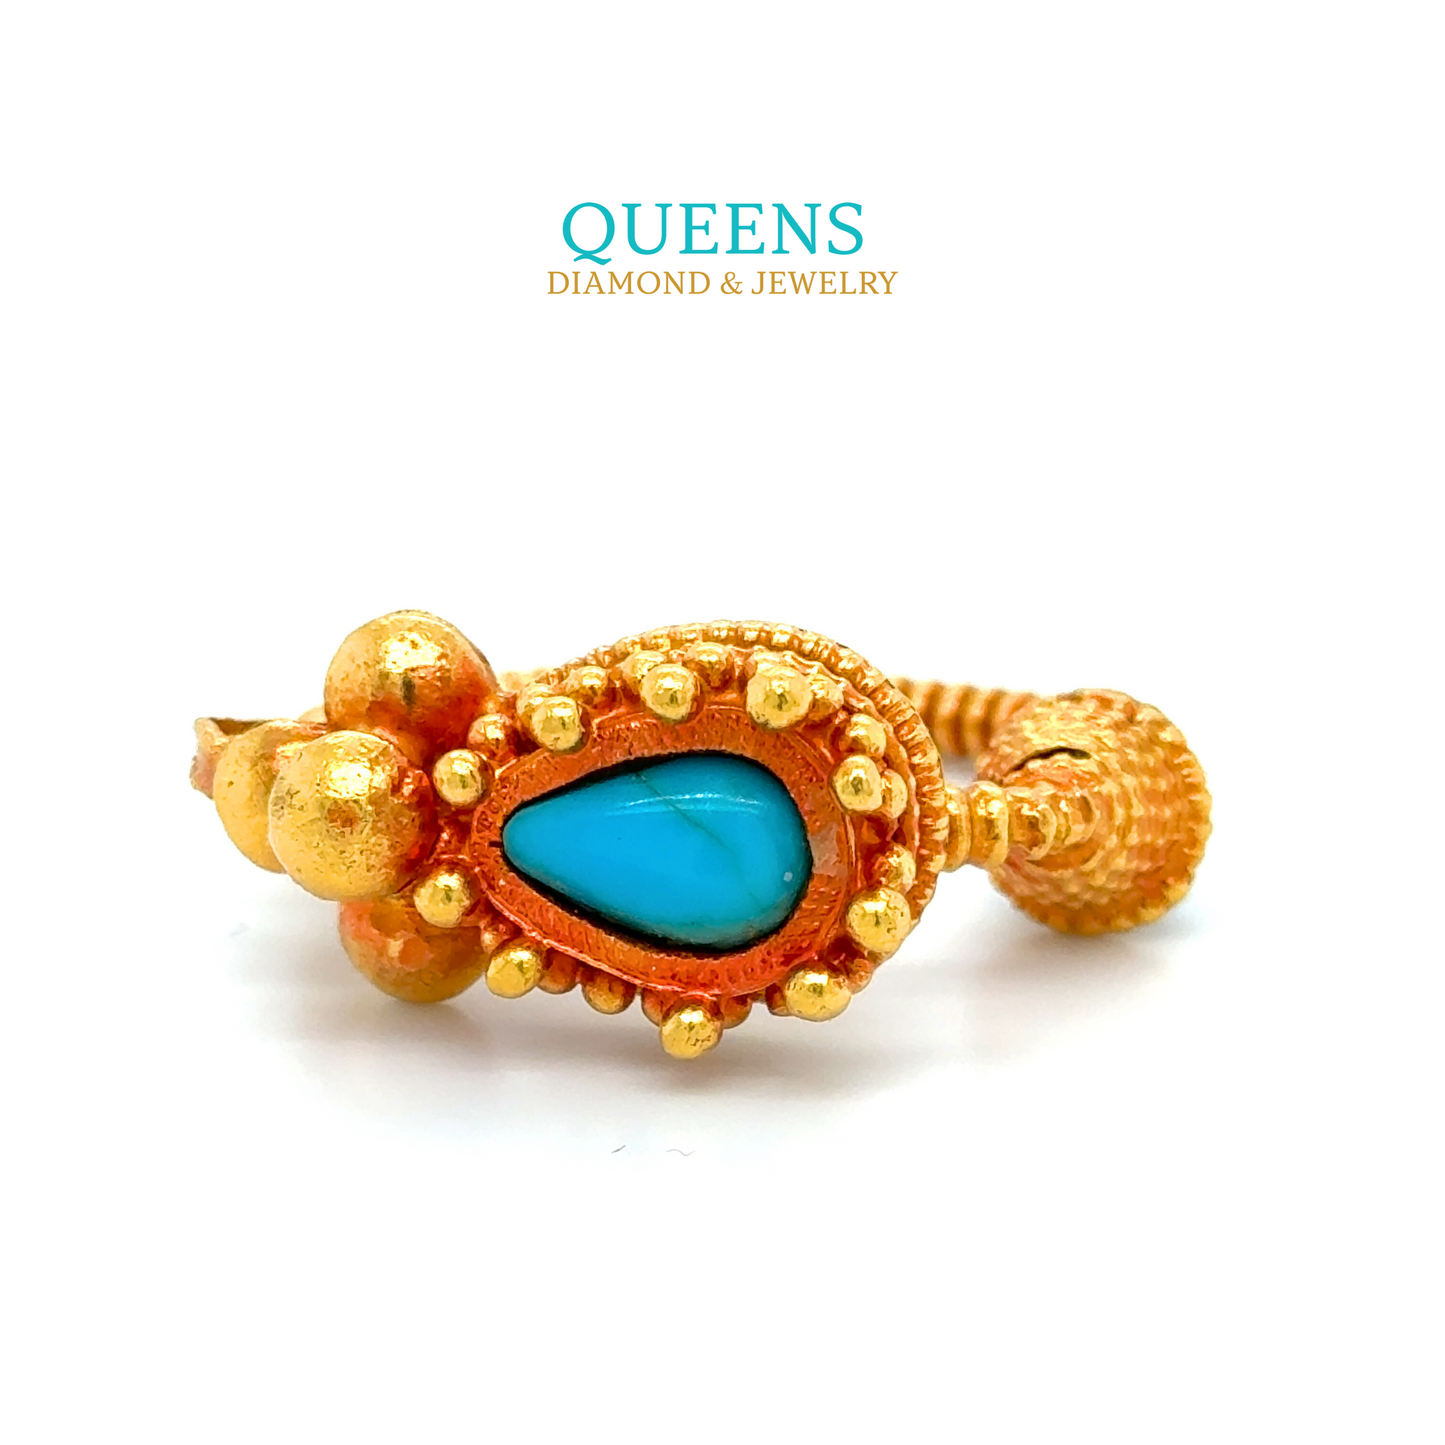 24KT Gold, Turquoise/CZ Stones Along